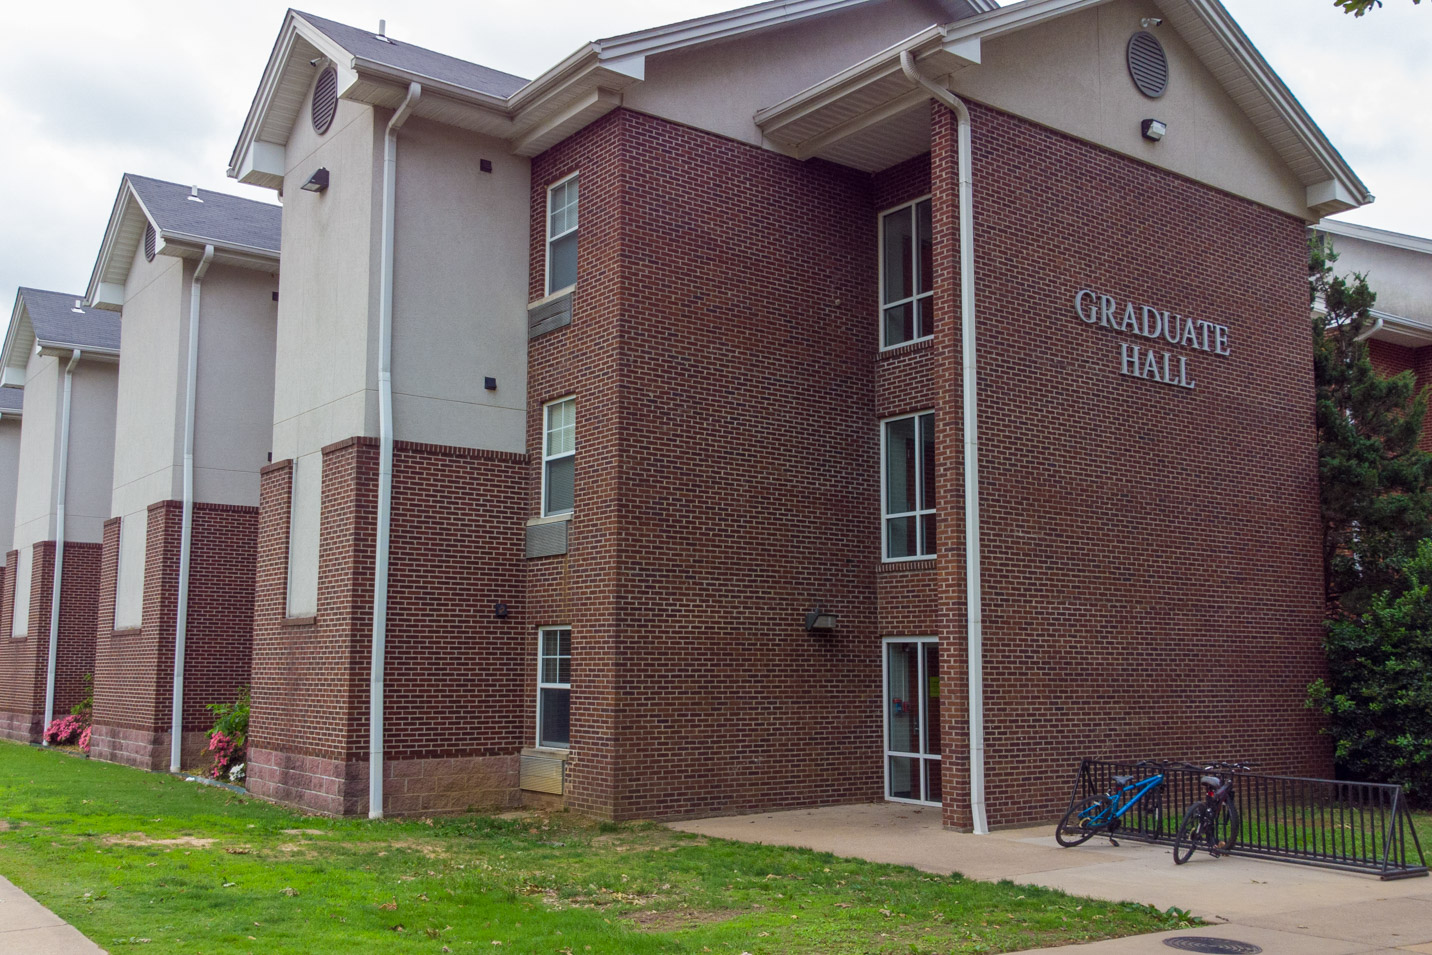 This is a photo of Graduate Hall, a residence hall at Harding University.